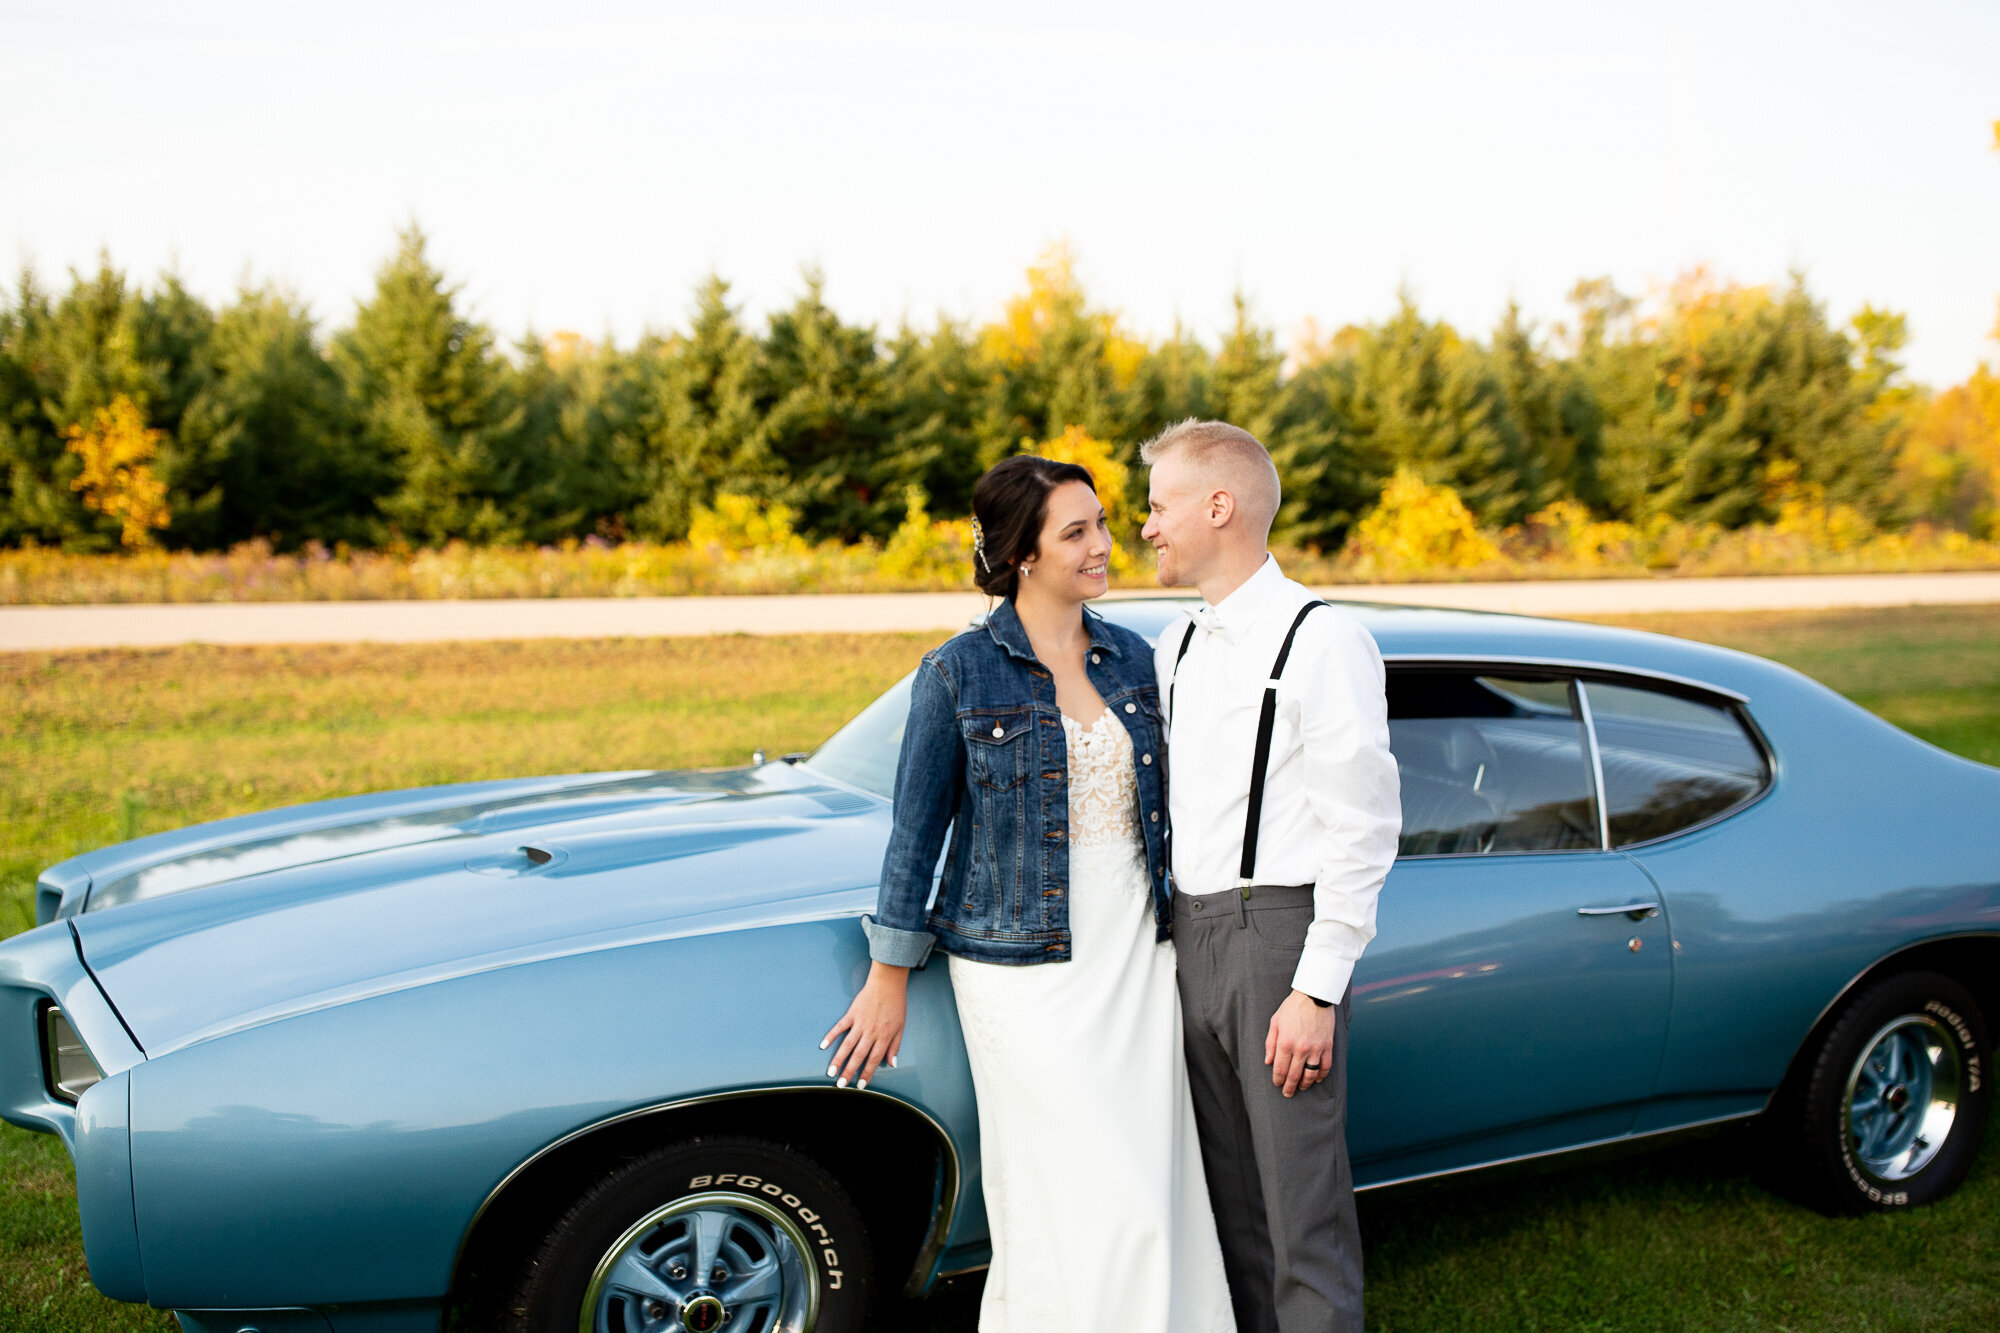 Outdoor+Private+Residence+Wedding+held+in+Appleton,+Wisconsin+-+Whit+Meza+Photography.jpeg